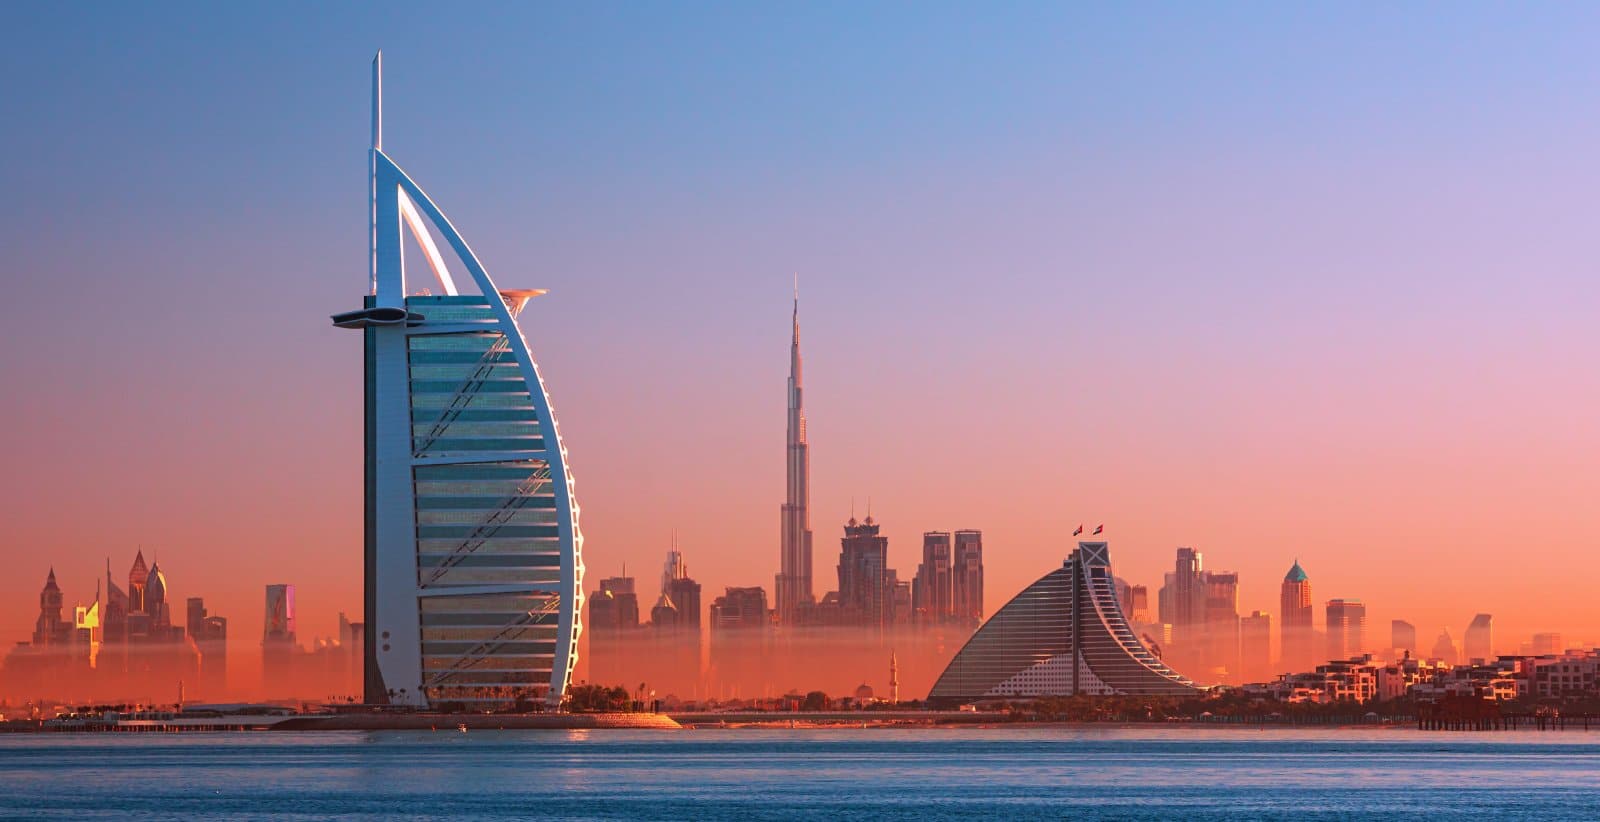 <p><span>Many travelers are drawn to Dubai, the glittering metropolis of the Persian Gulf. Enjoy world-class shopping, impressive architecture, and desert adventures with the Dubai Virtual Work Residency Visa. </span></p><p><b>Cost of application:</b><span> 611 USD</span></p><p><b>Income requirement:</b><span> 3500 USD per month</span></p><p><b>Visa duration: </b><span>1 year</span></p>